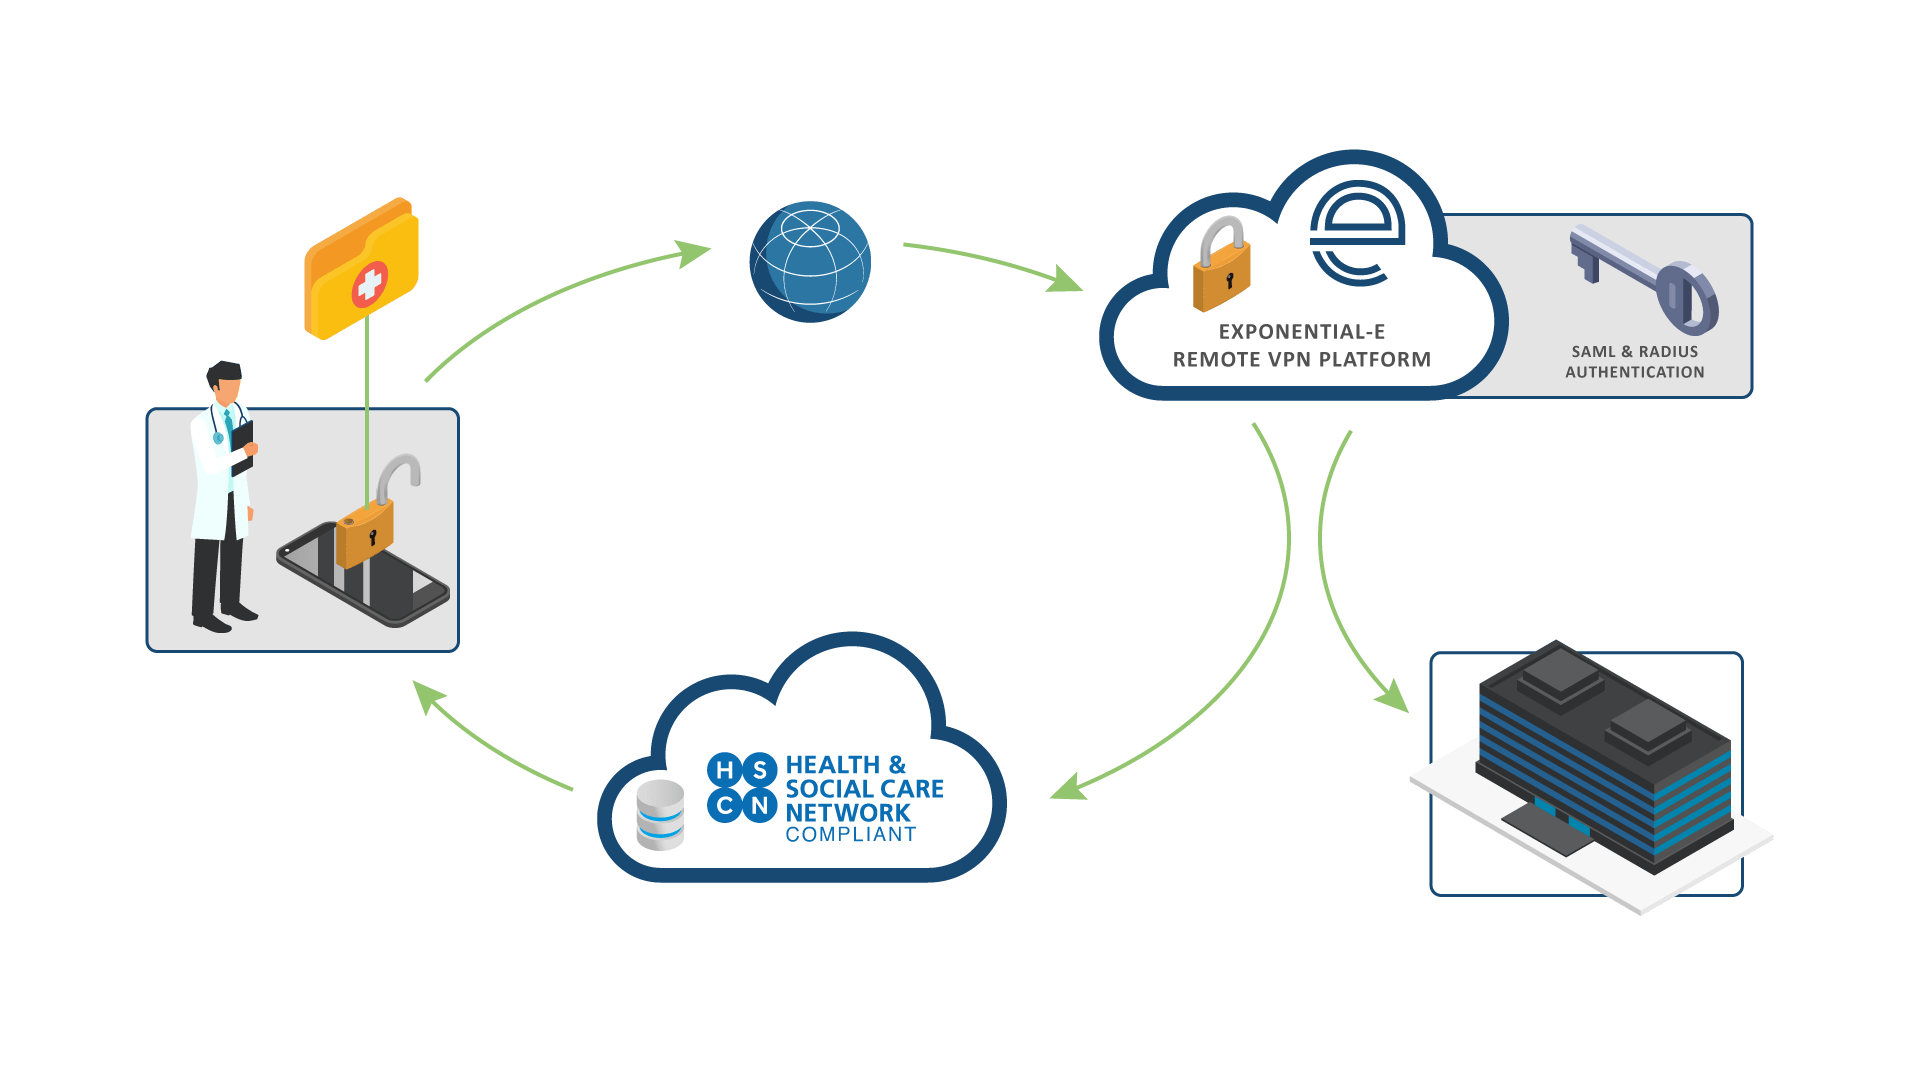 HSCN Working From Home Solution